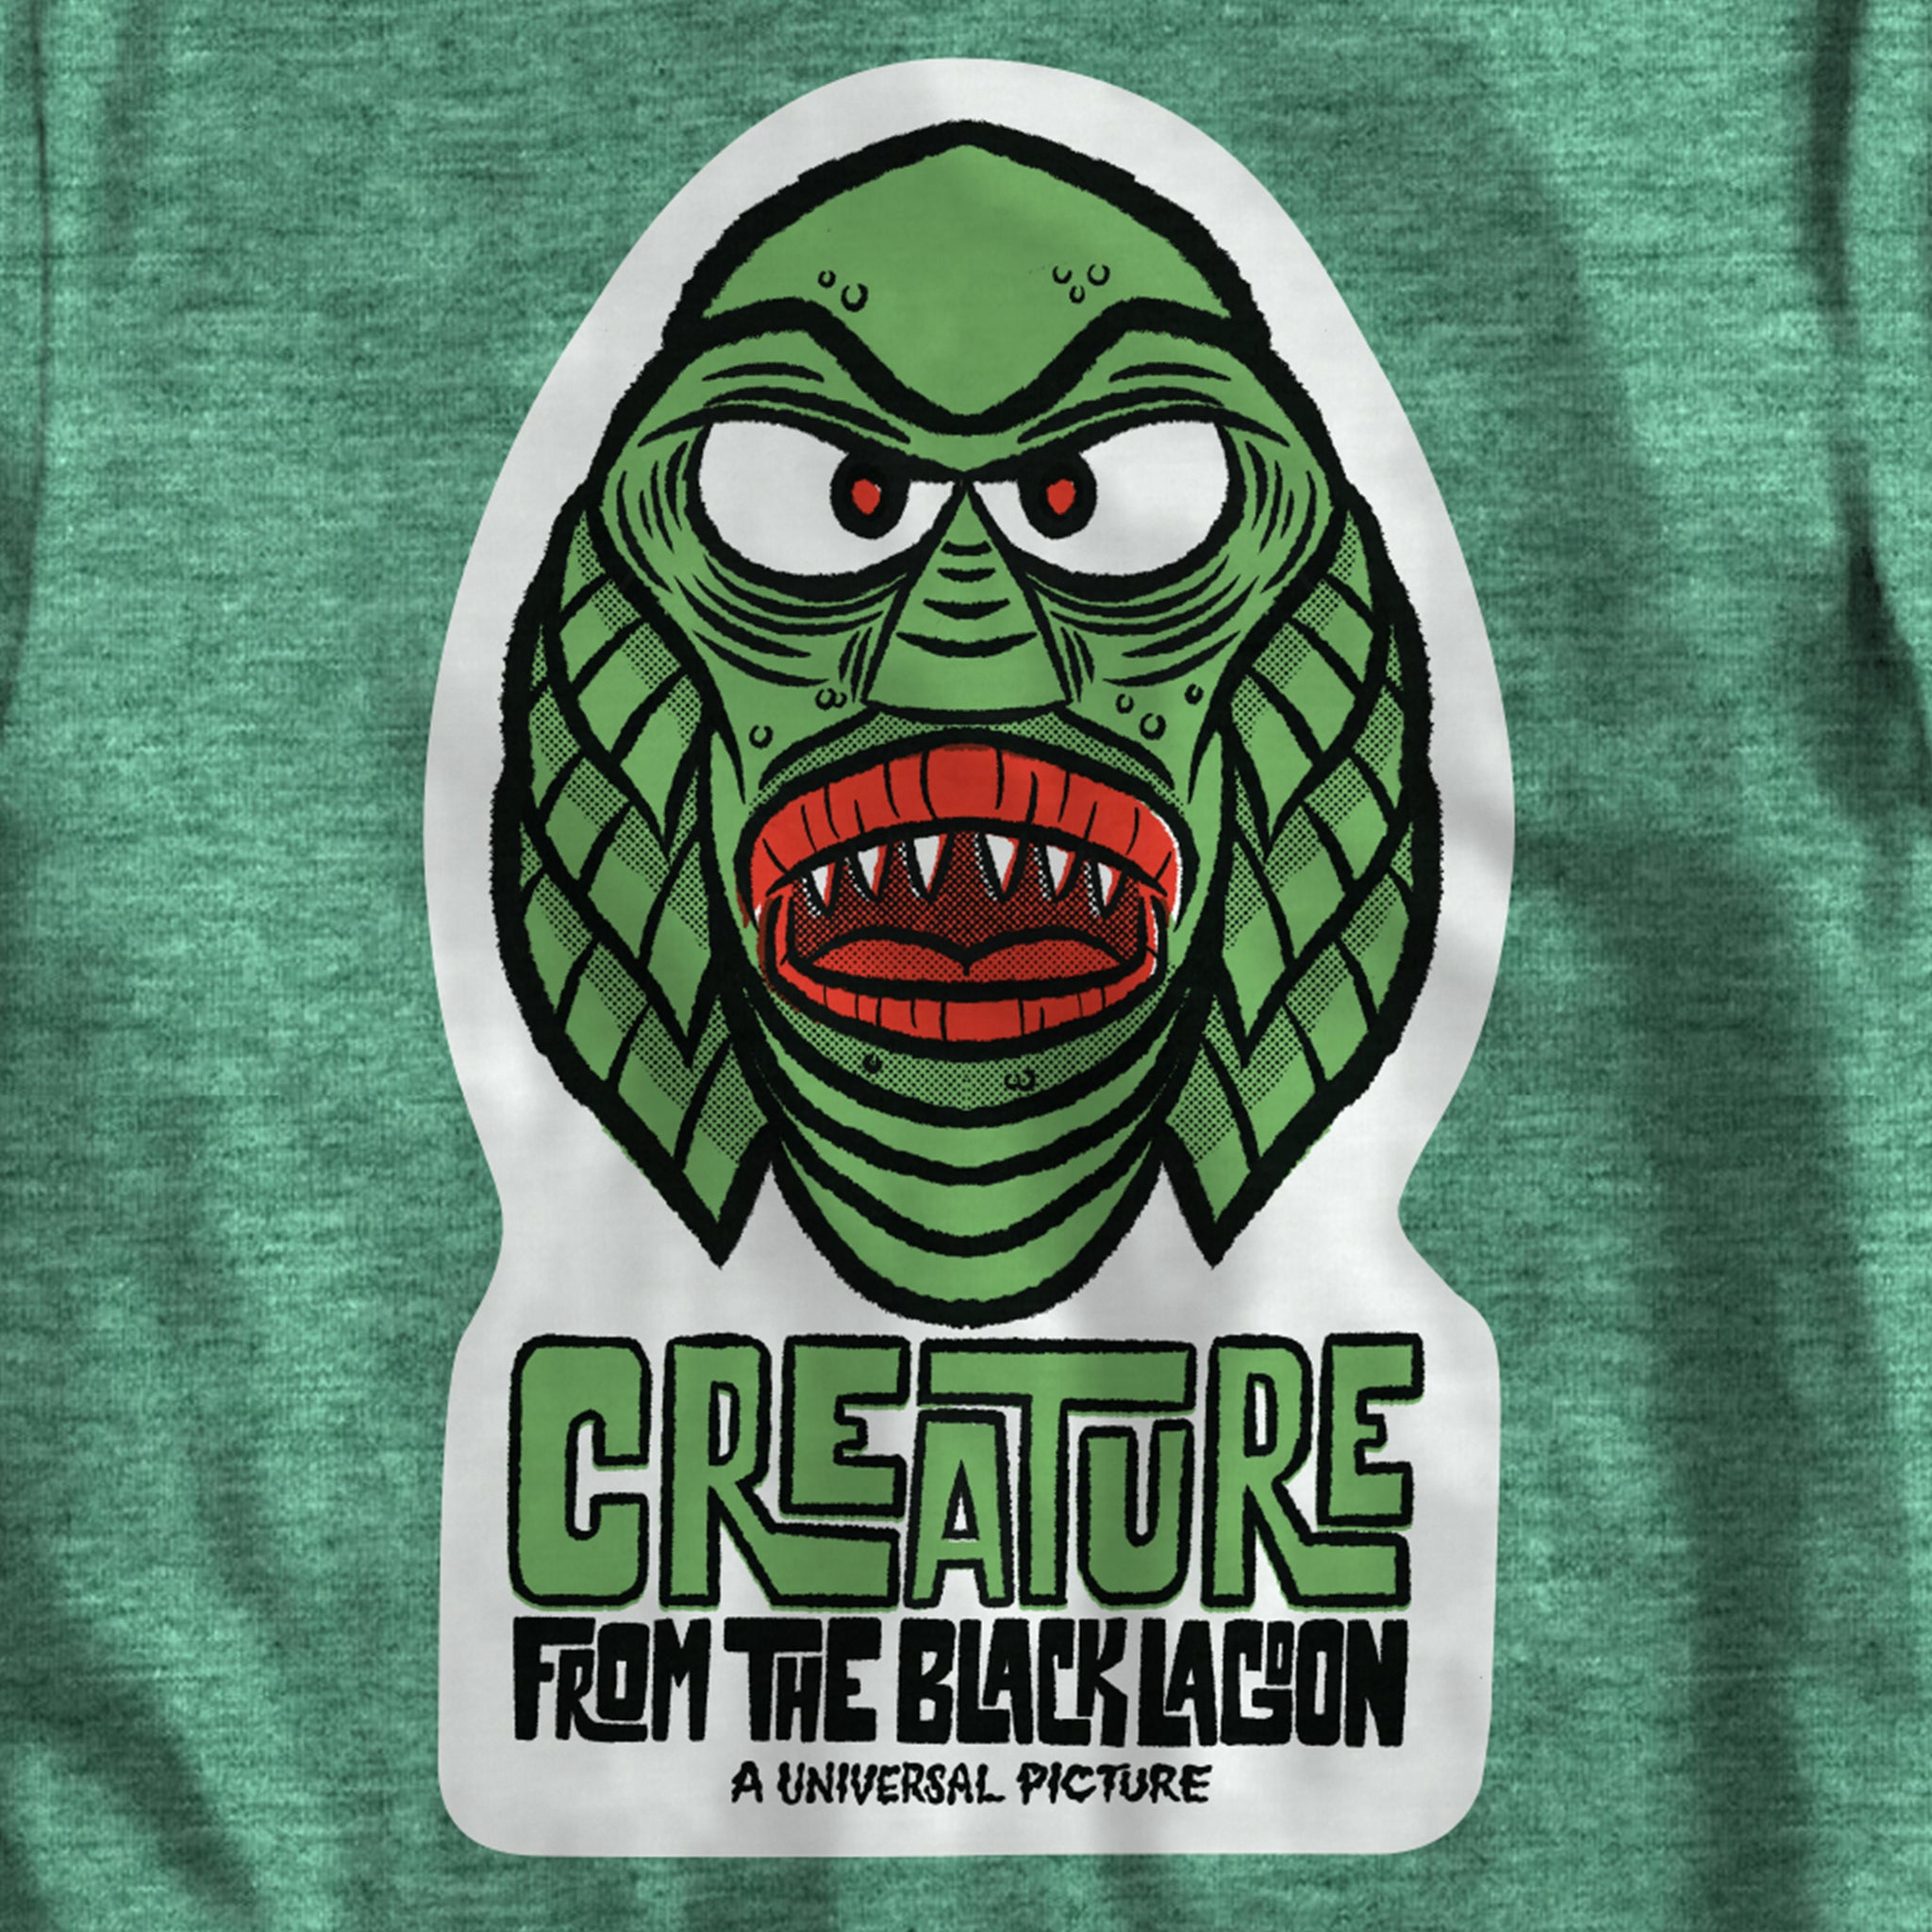 Universal Monsters T-Shirt - FreakyFaces Creature from the Black Lagoon